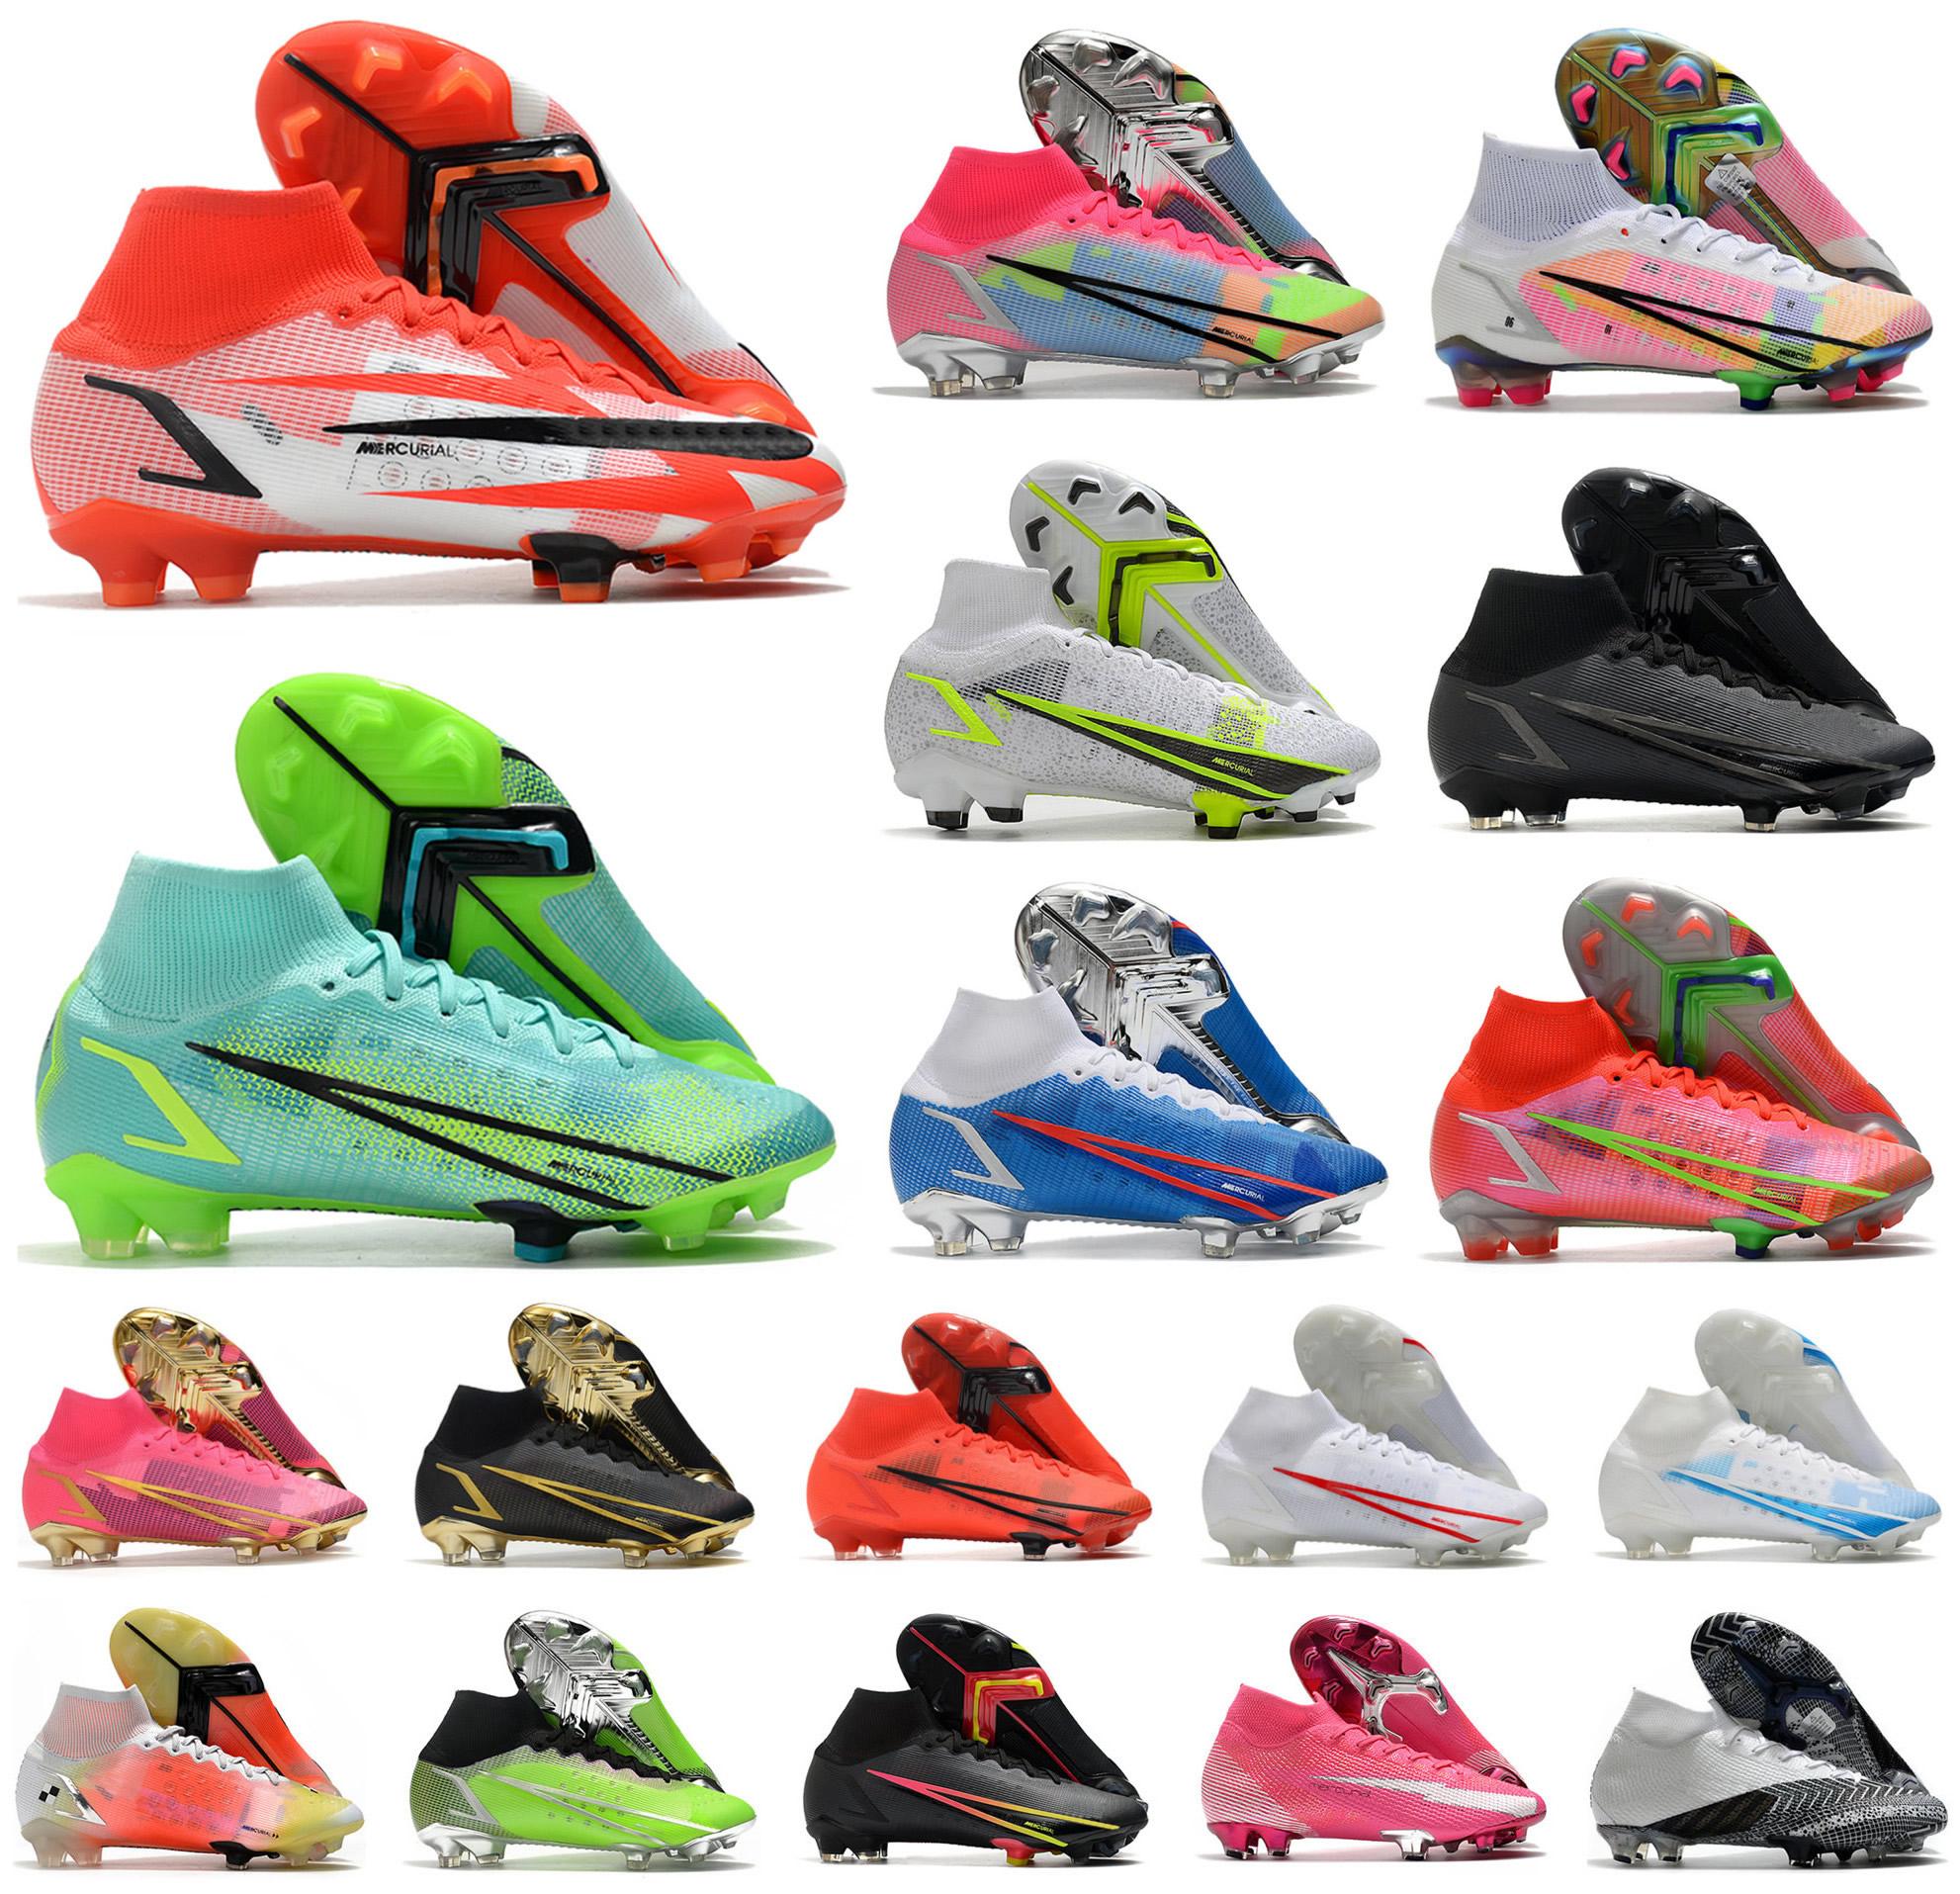 

2021 Superfly 8 VIII 360 Elite FG Soccer Shoes XIV Dragonfly CR7 Ronaldo IMPULSE PACK MDS 04 14 Dream Speed 4 Mens Women Boys High Football Boots Cleats US3-11, Color 1